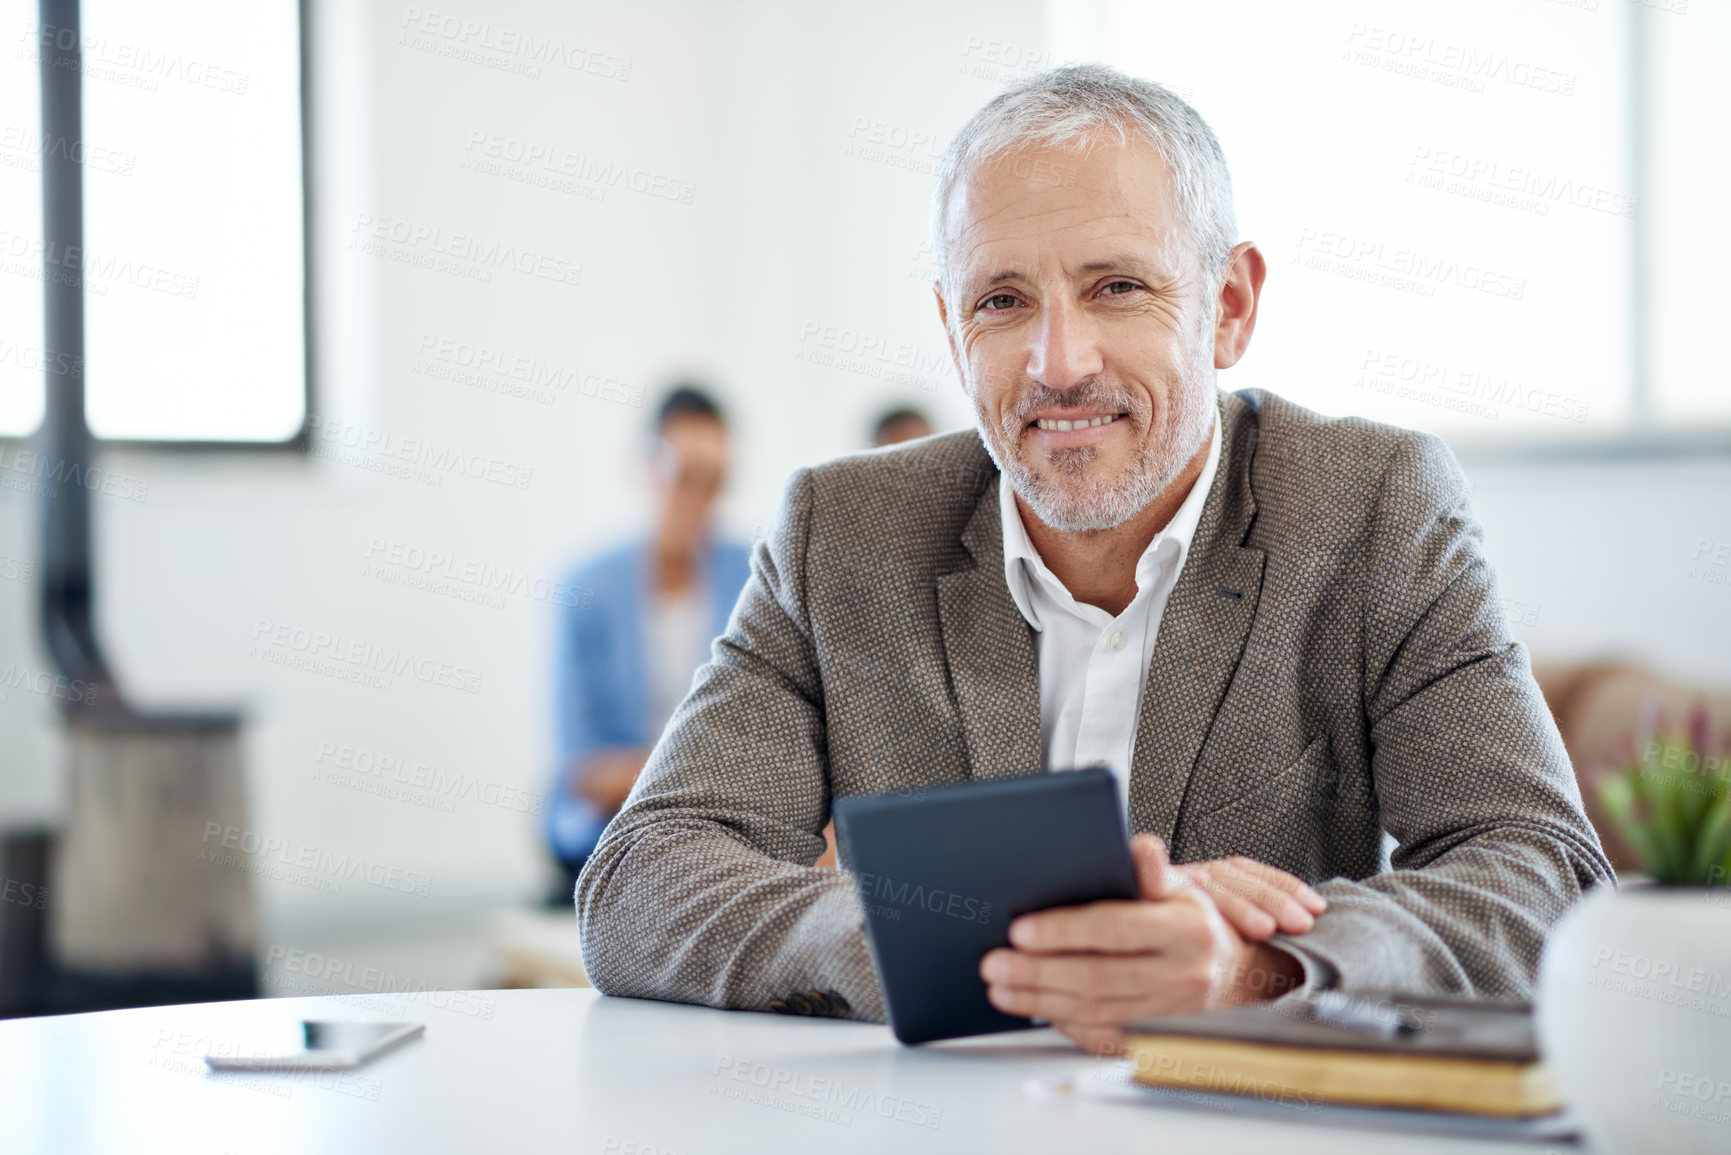 Buy stock photo Portrait of a mature businessman using a digital tablet while sitting at a table in an office